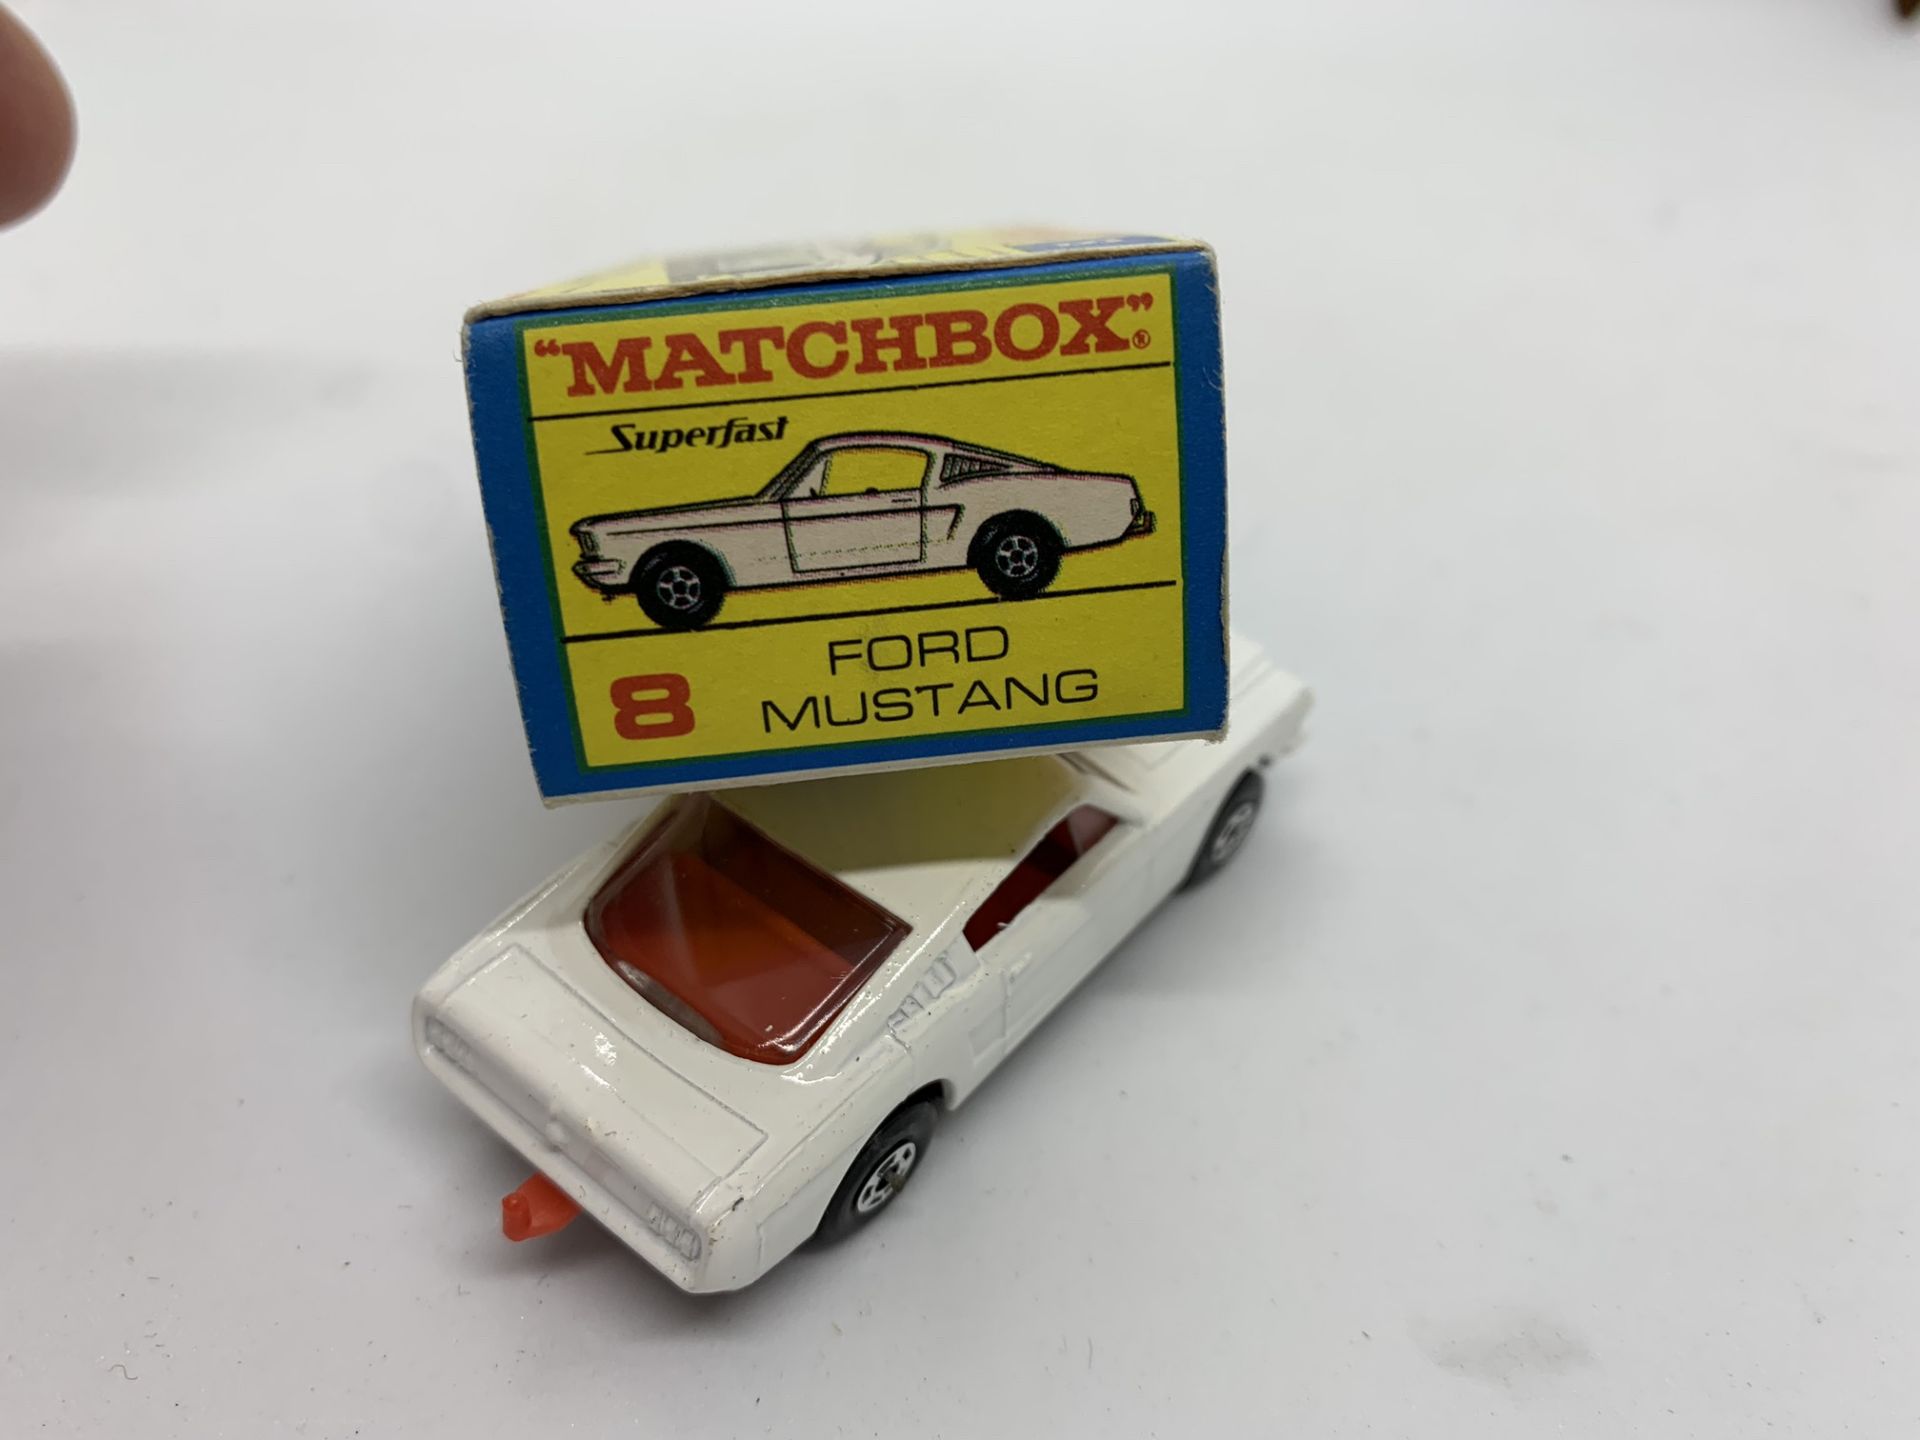 MATCHBOX FORD MUSTANG NO 8 WITH ORIGINAL BOX - NO RESERVE - Image 6 of 6